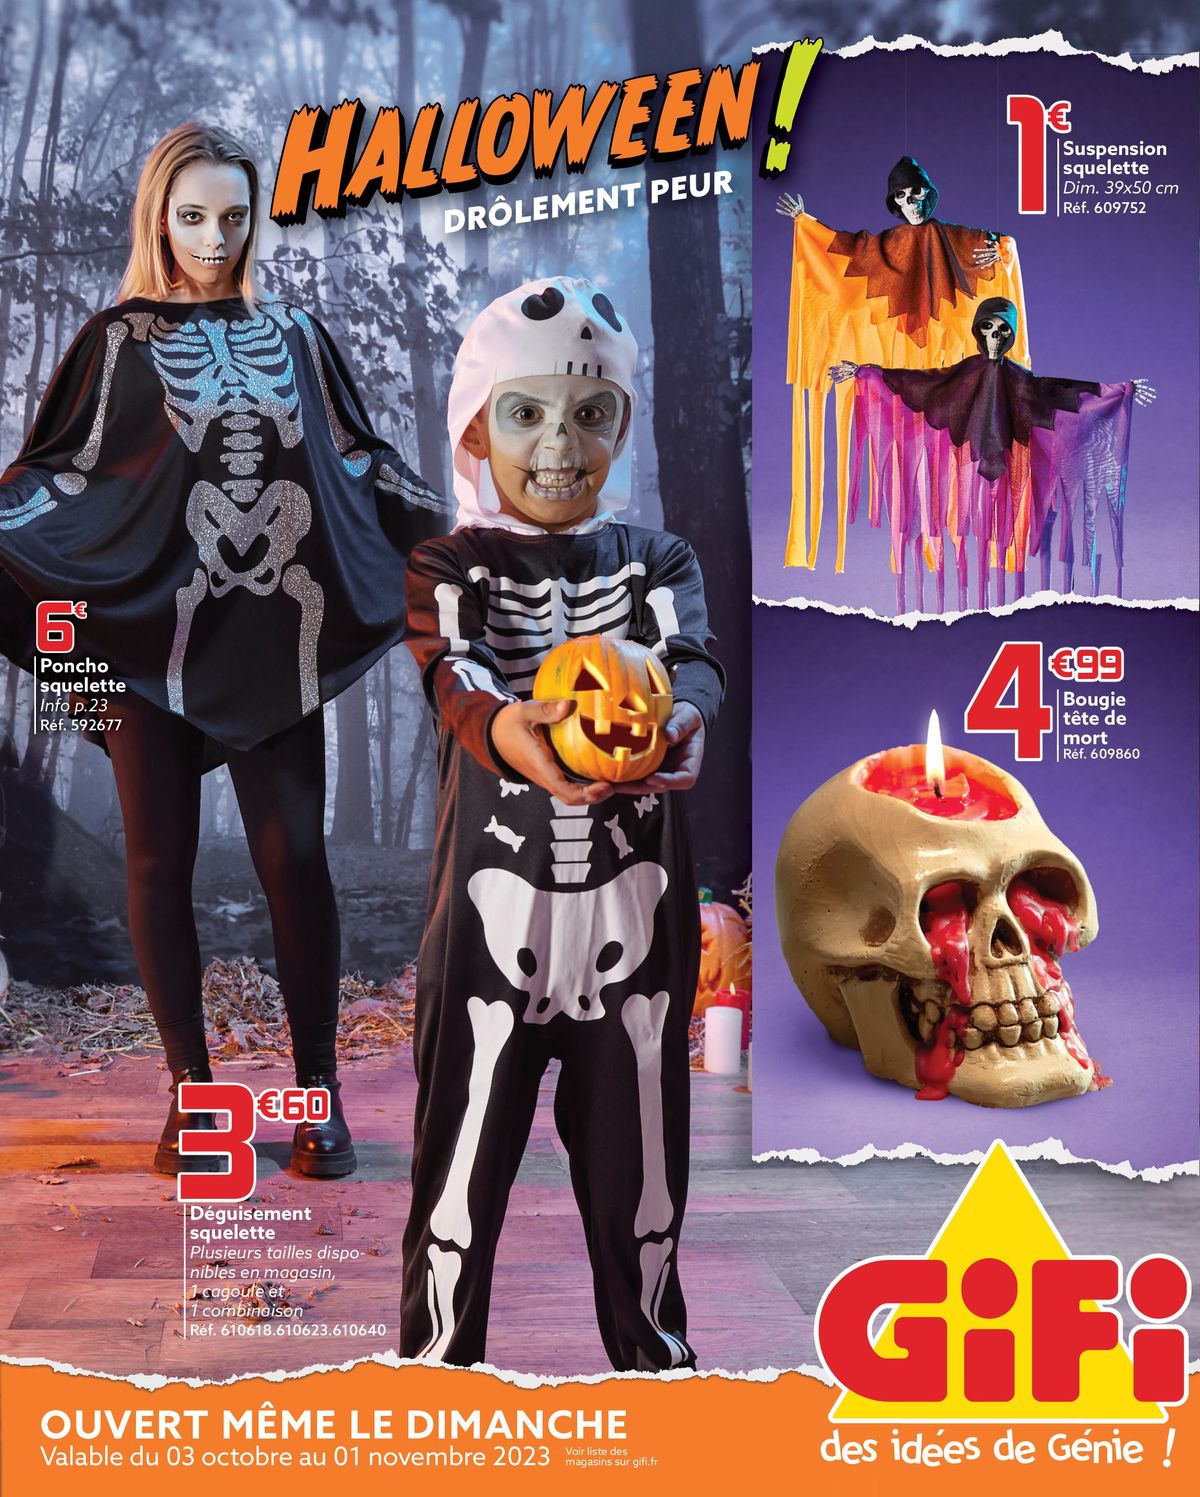 Catalogue Halloween !, page 00001